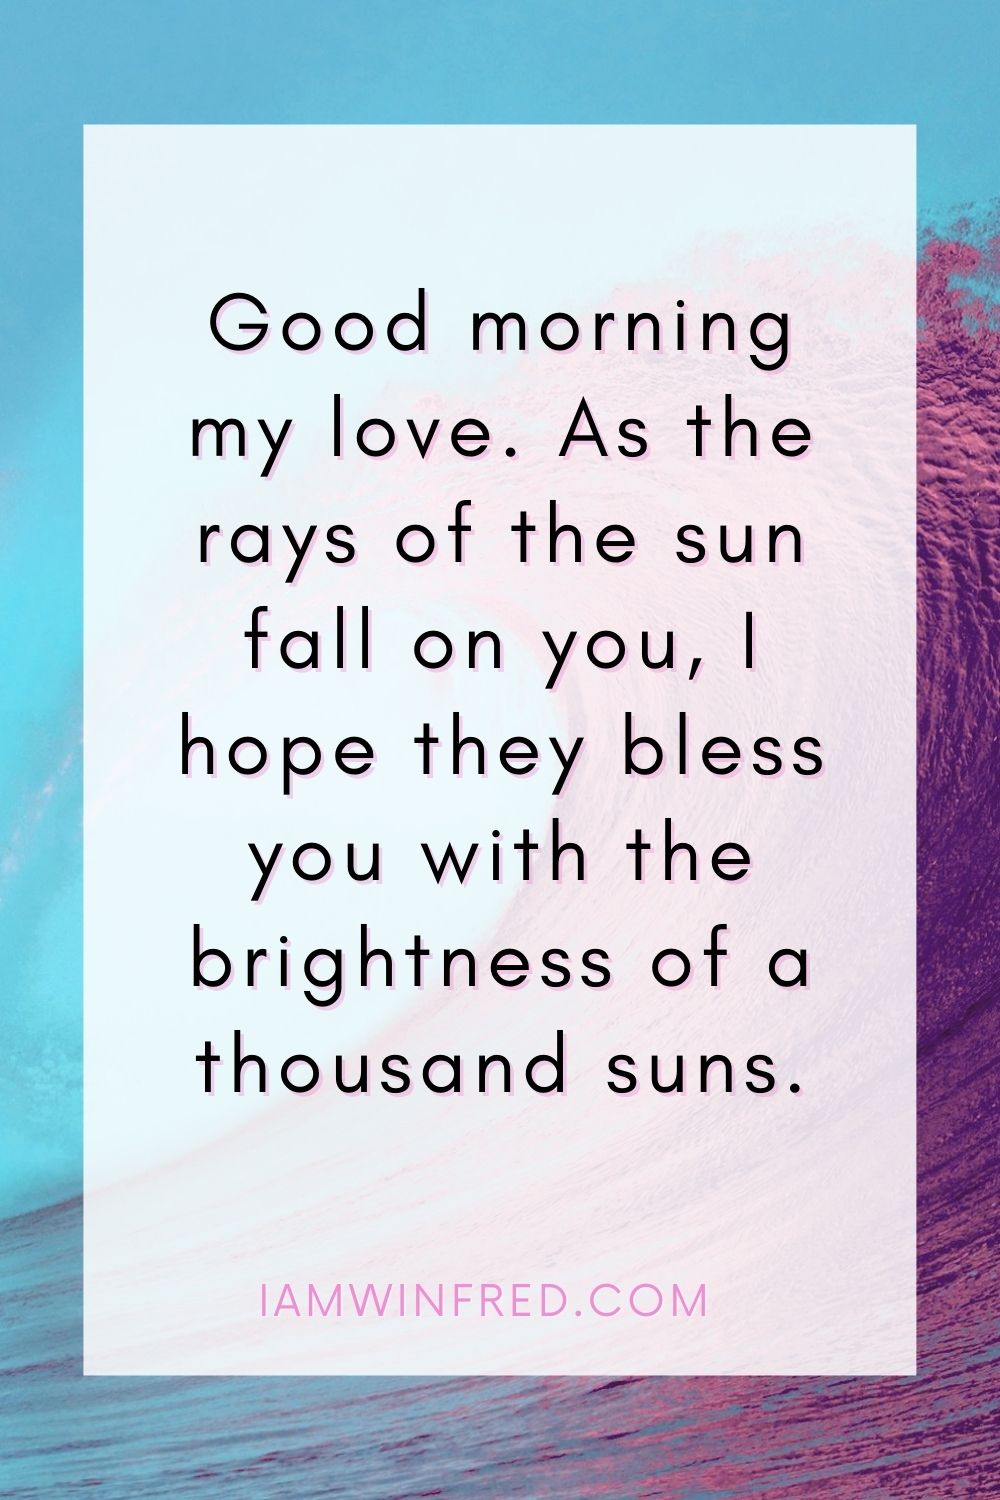 Good Morning My Love. As The Rays Of The Sun Fall On You I Hope They Bless You With The Brightness Of A Thousand Suns.